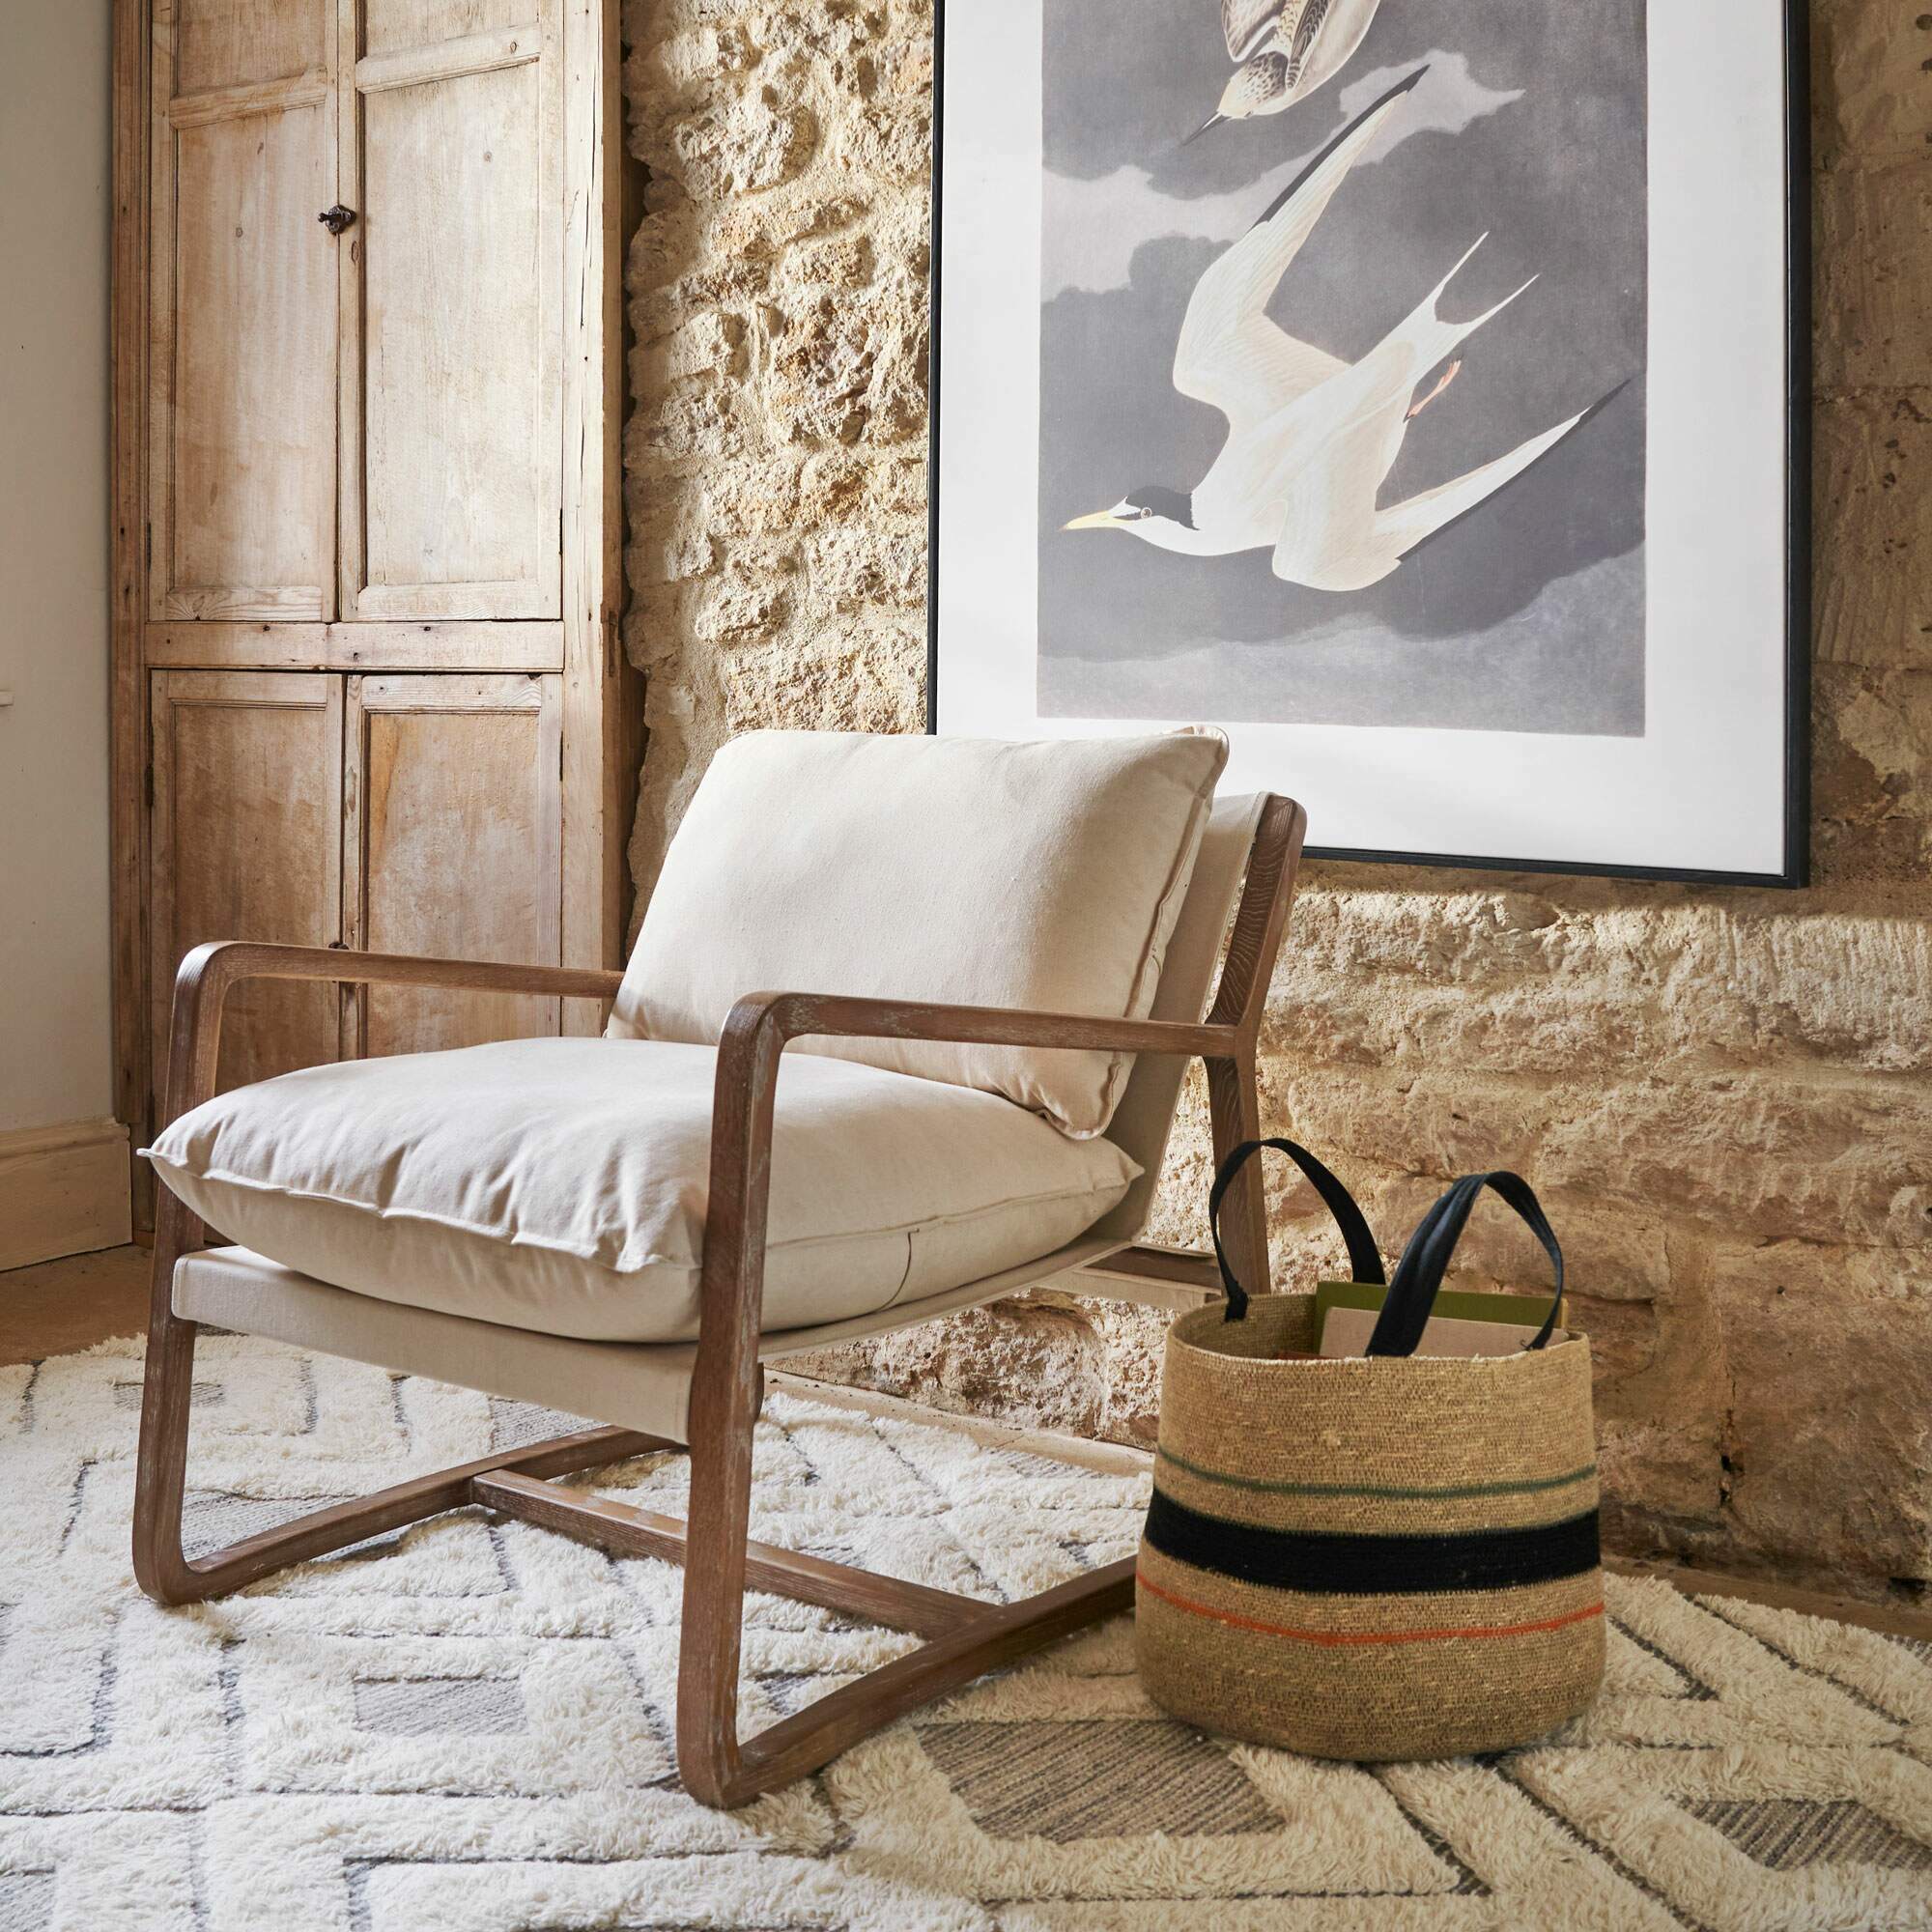 Read more about Graham and green sullivan armchair